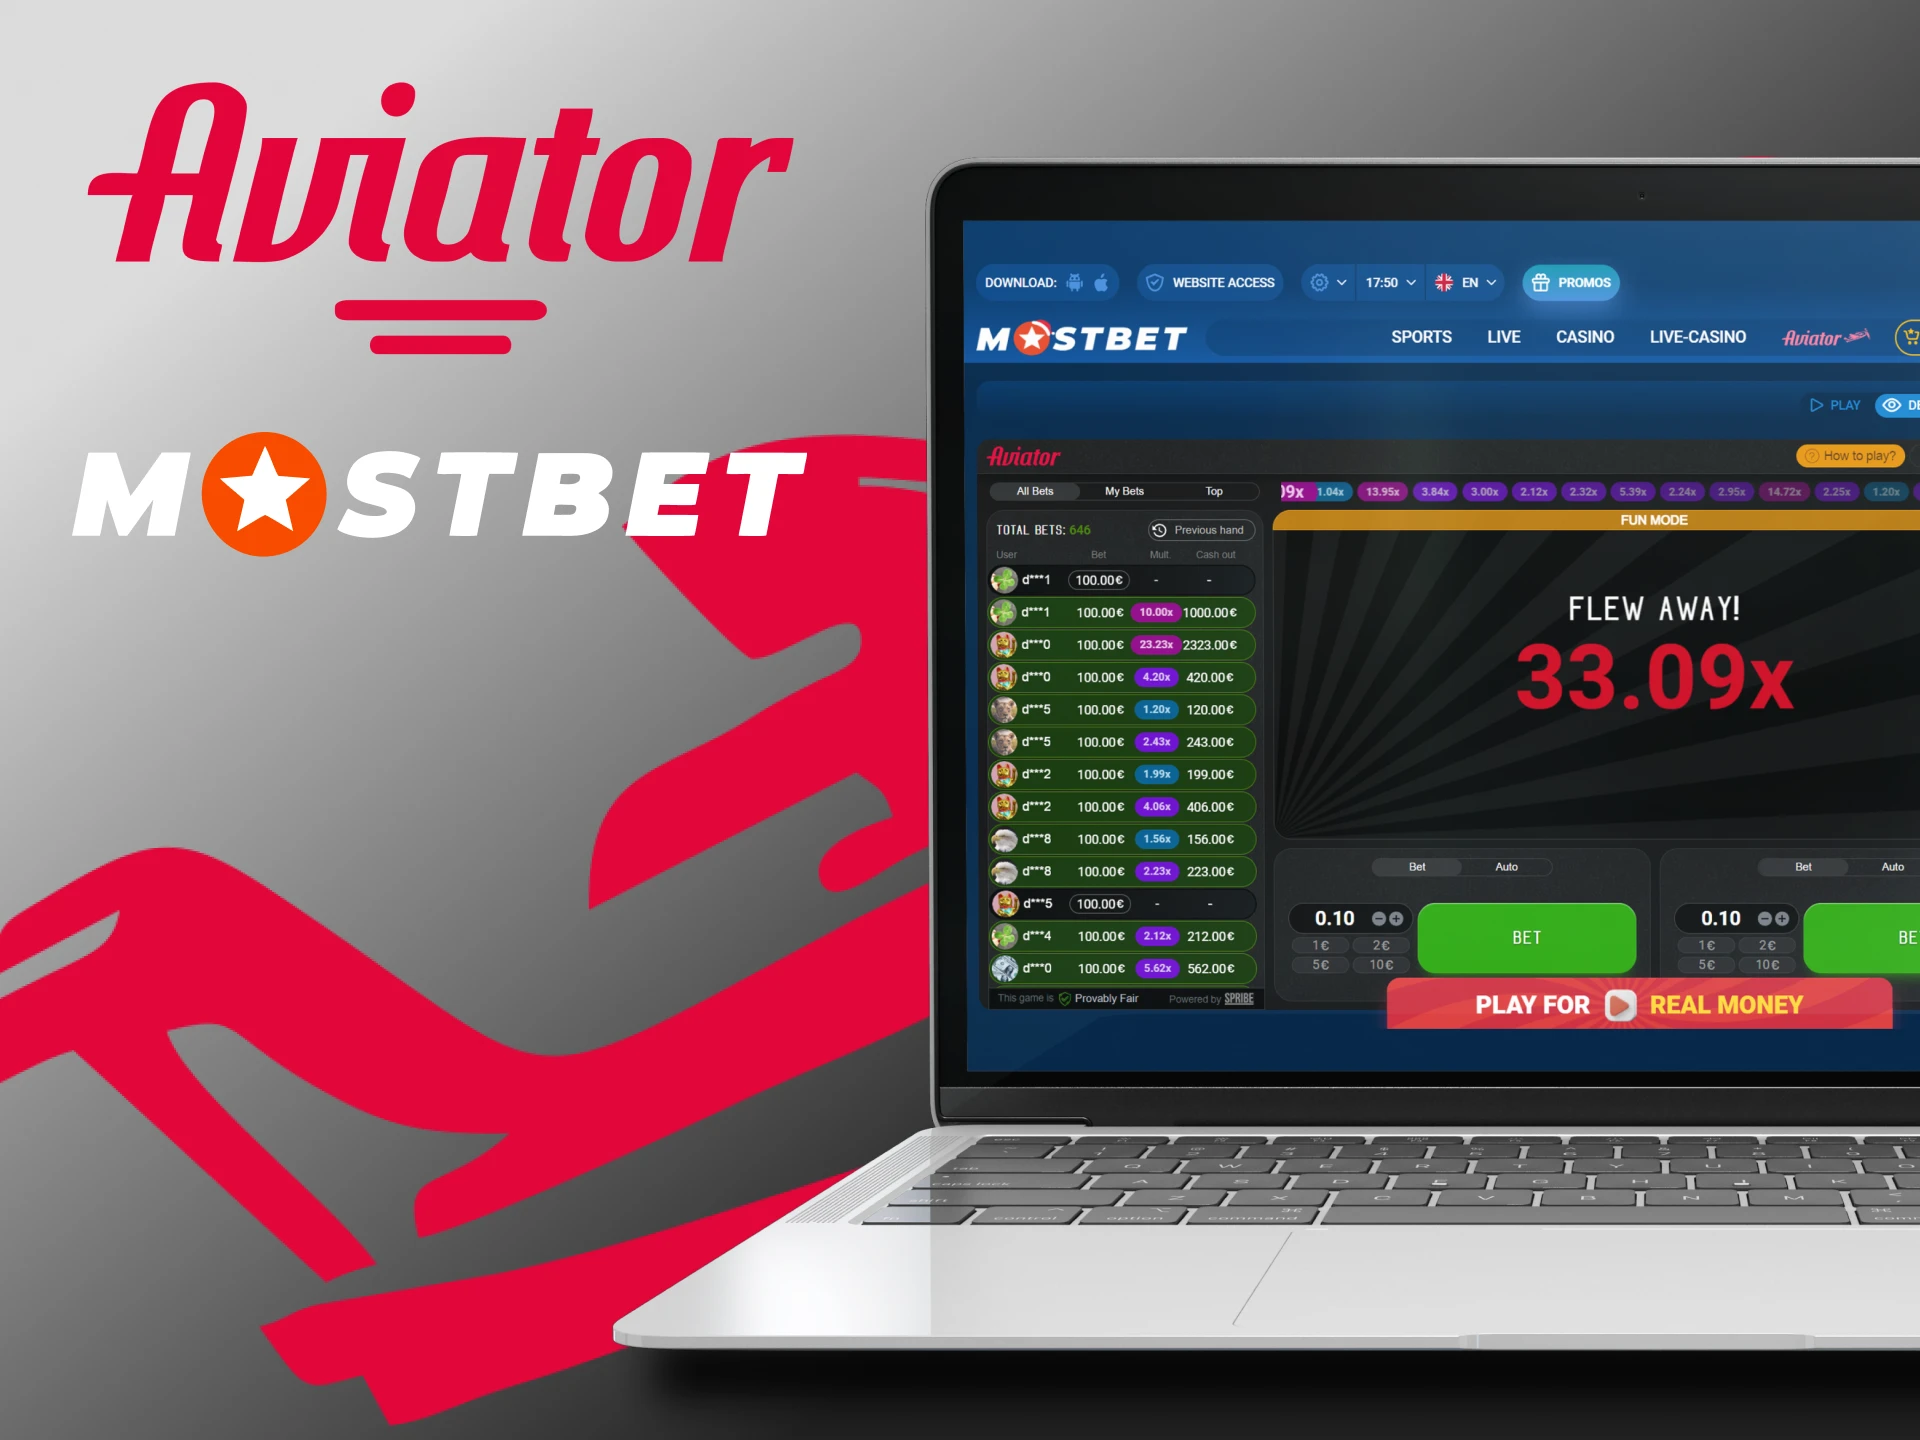 You can play the Aviator game on the Mostbet website.